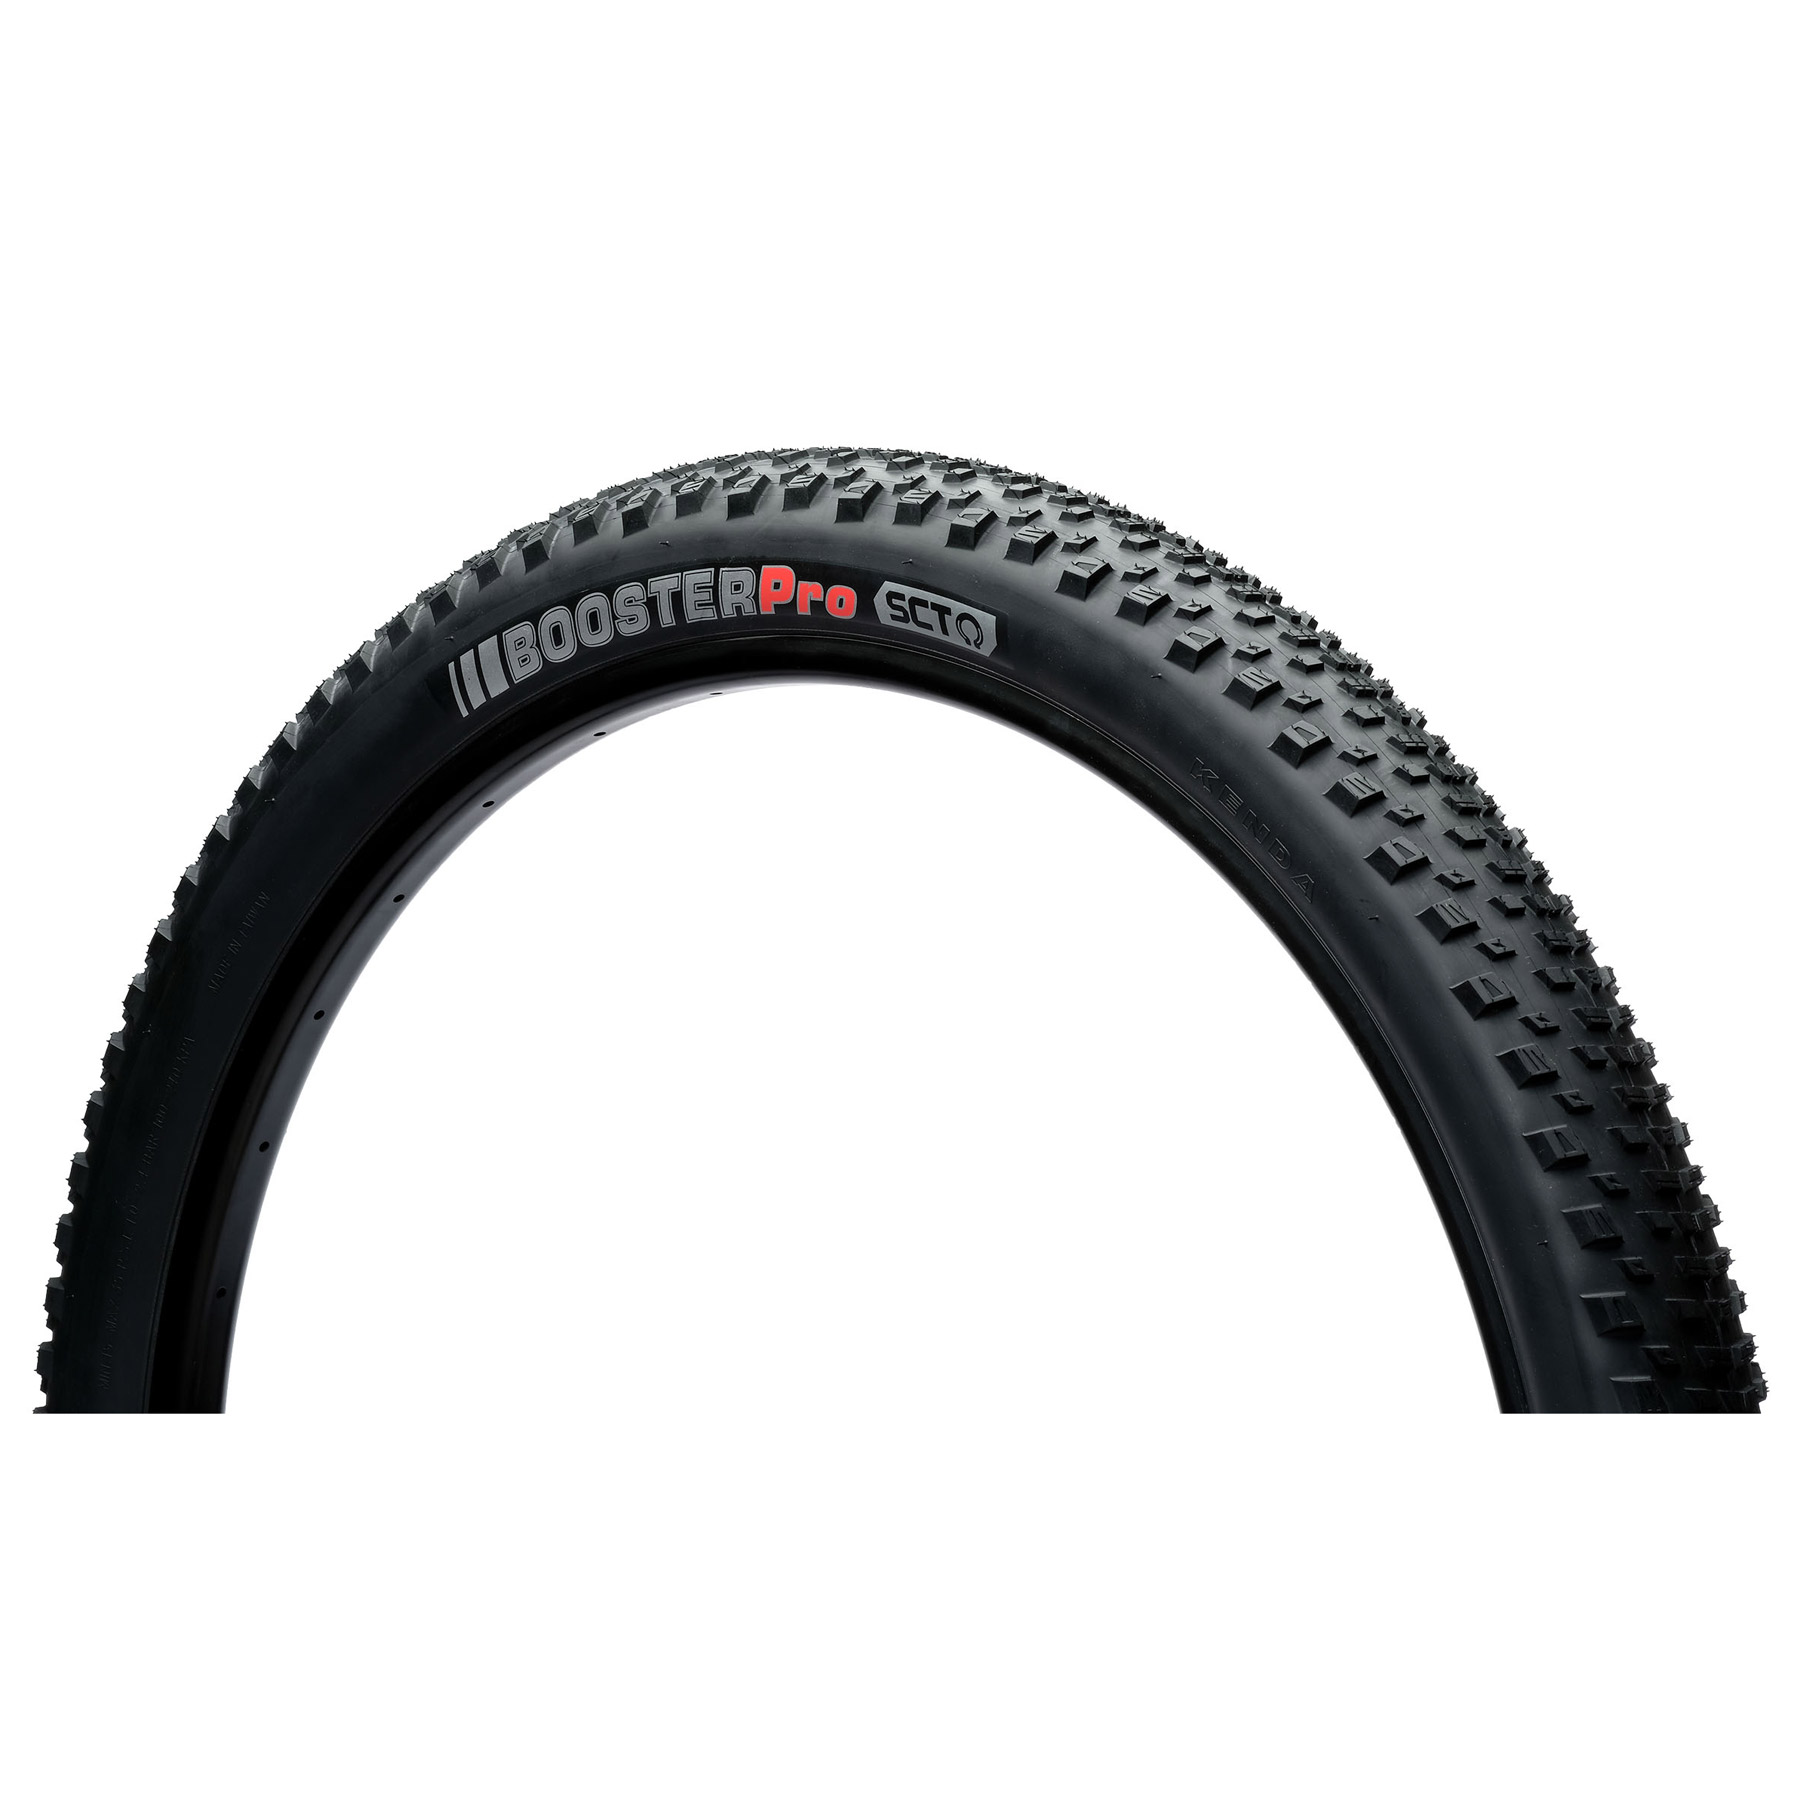 Picture of Kenda Booster Pro SCT Folding Tire - 29x2.20 Inches